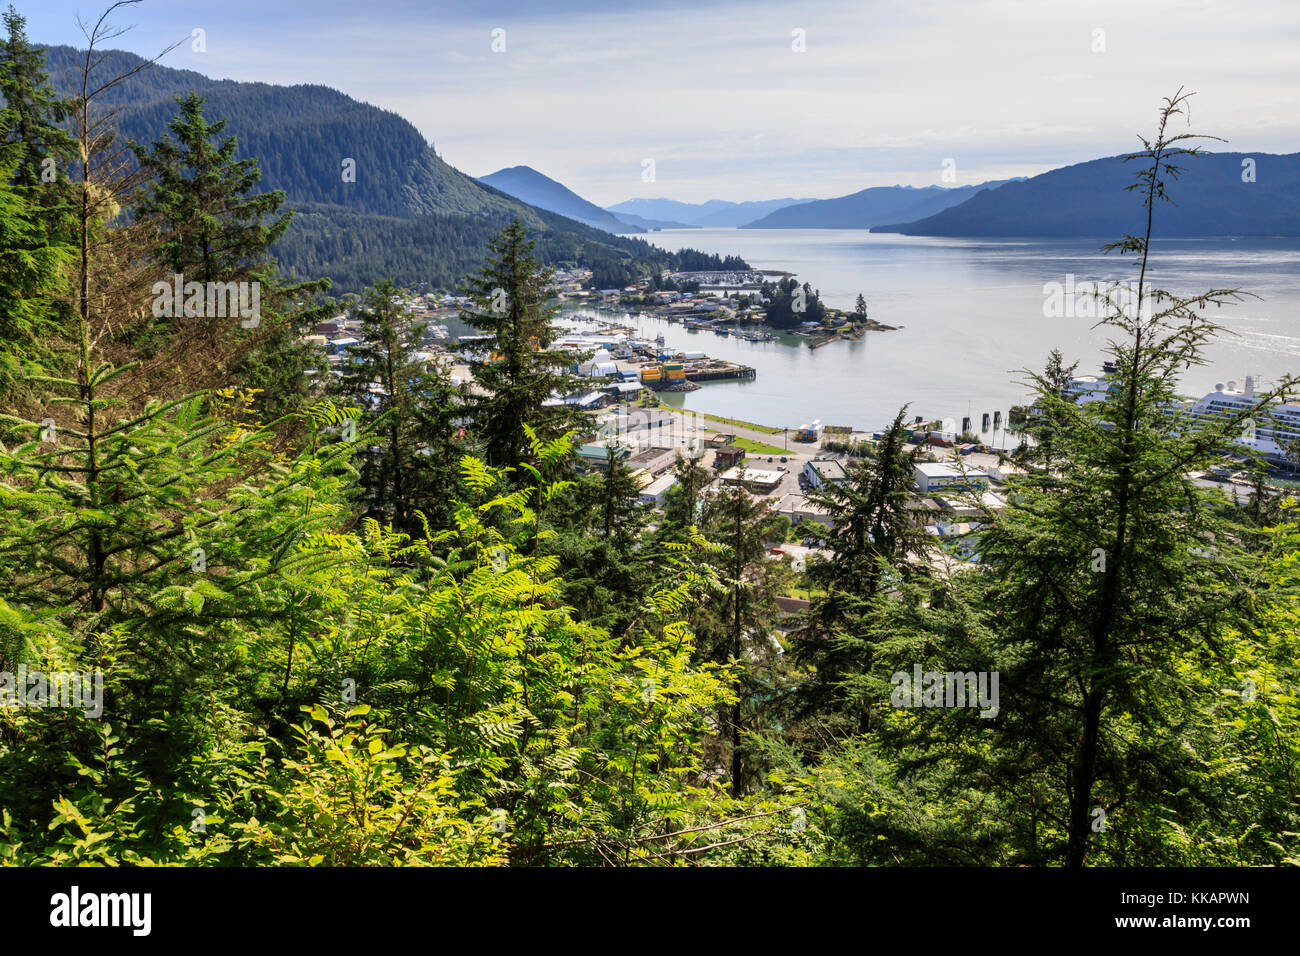 Stunning view, Wrangell and landscape from Mount Dewey trail lookout, Wrangell, pioneer port and fishing community, Alaska, USA North America Stock Photo